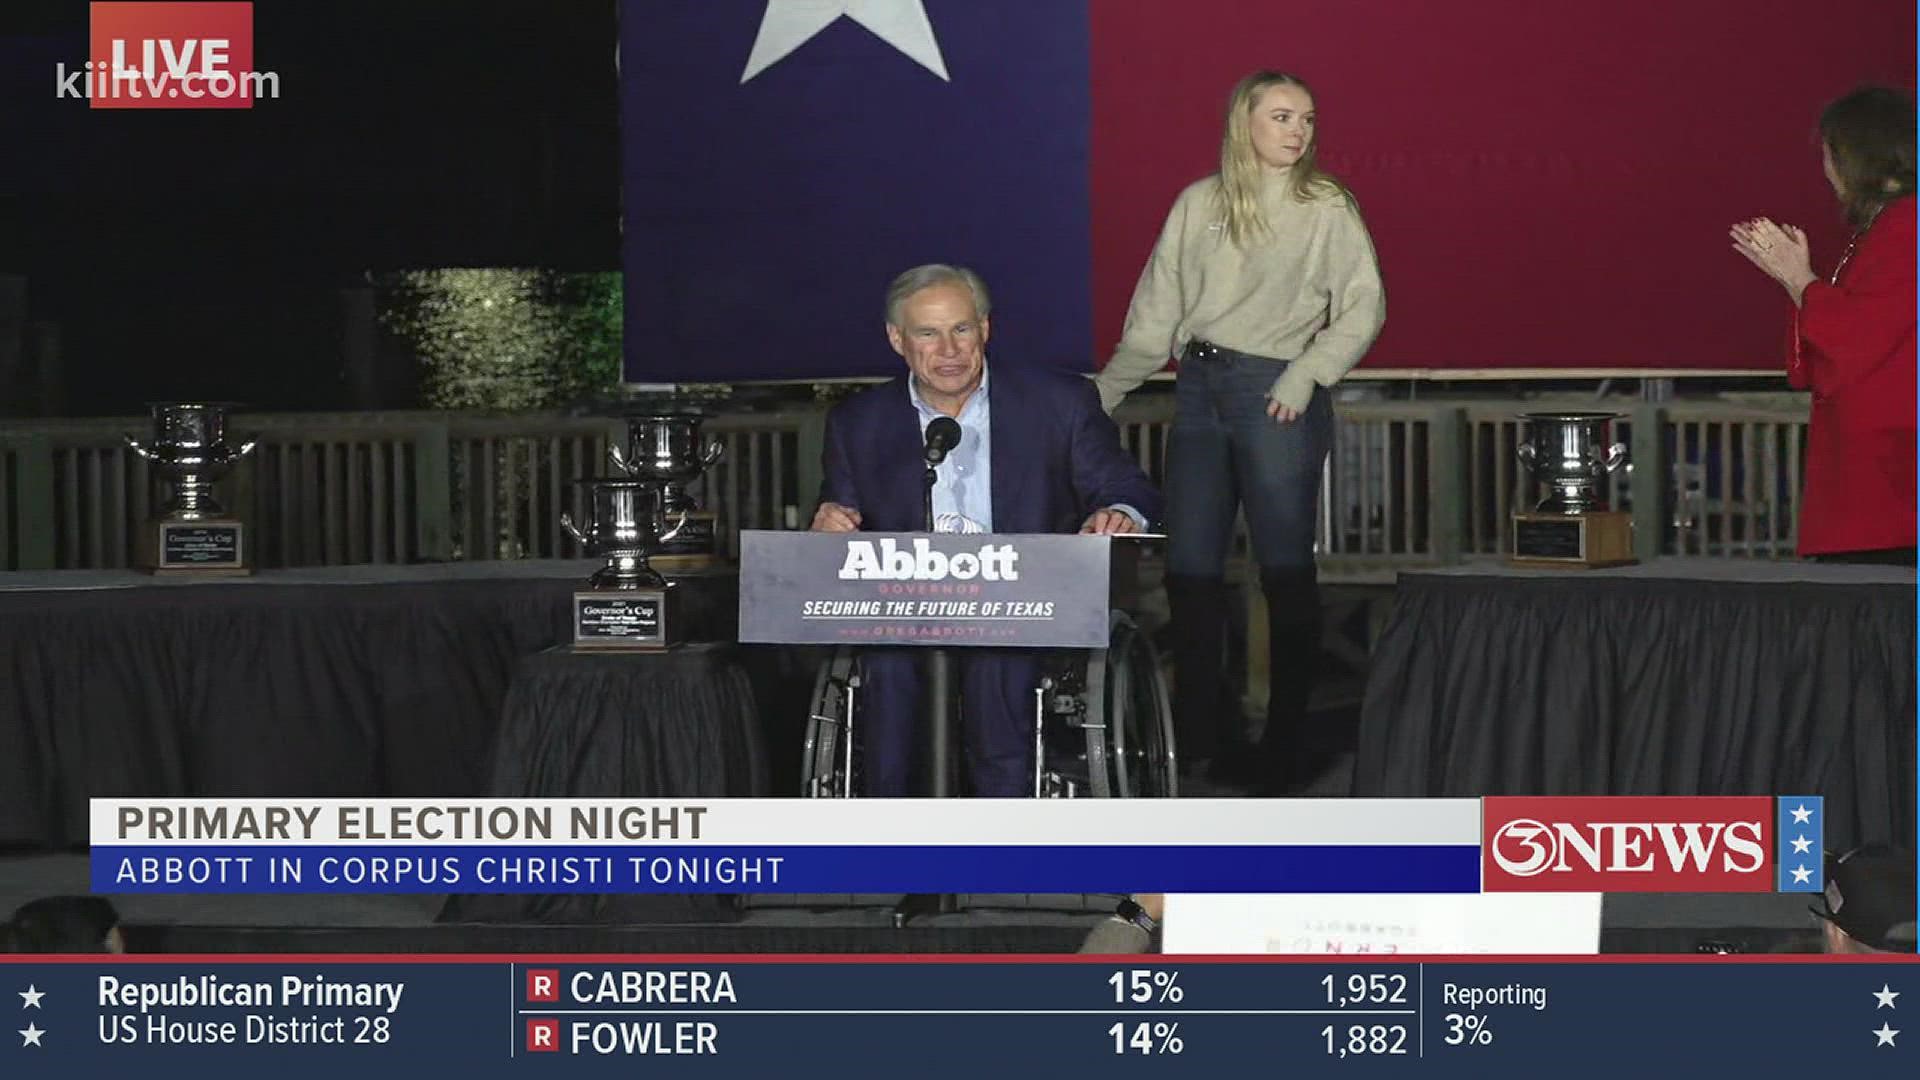 3News Anchor mike Gillaspia gives an update on the event hosted by Texas Governor Greg Abbott.